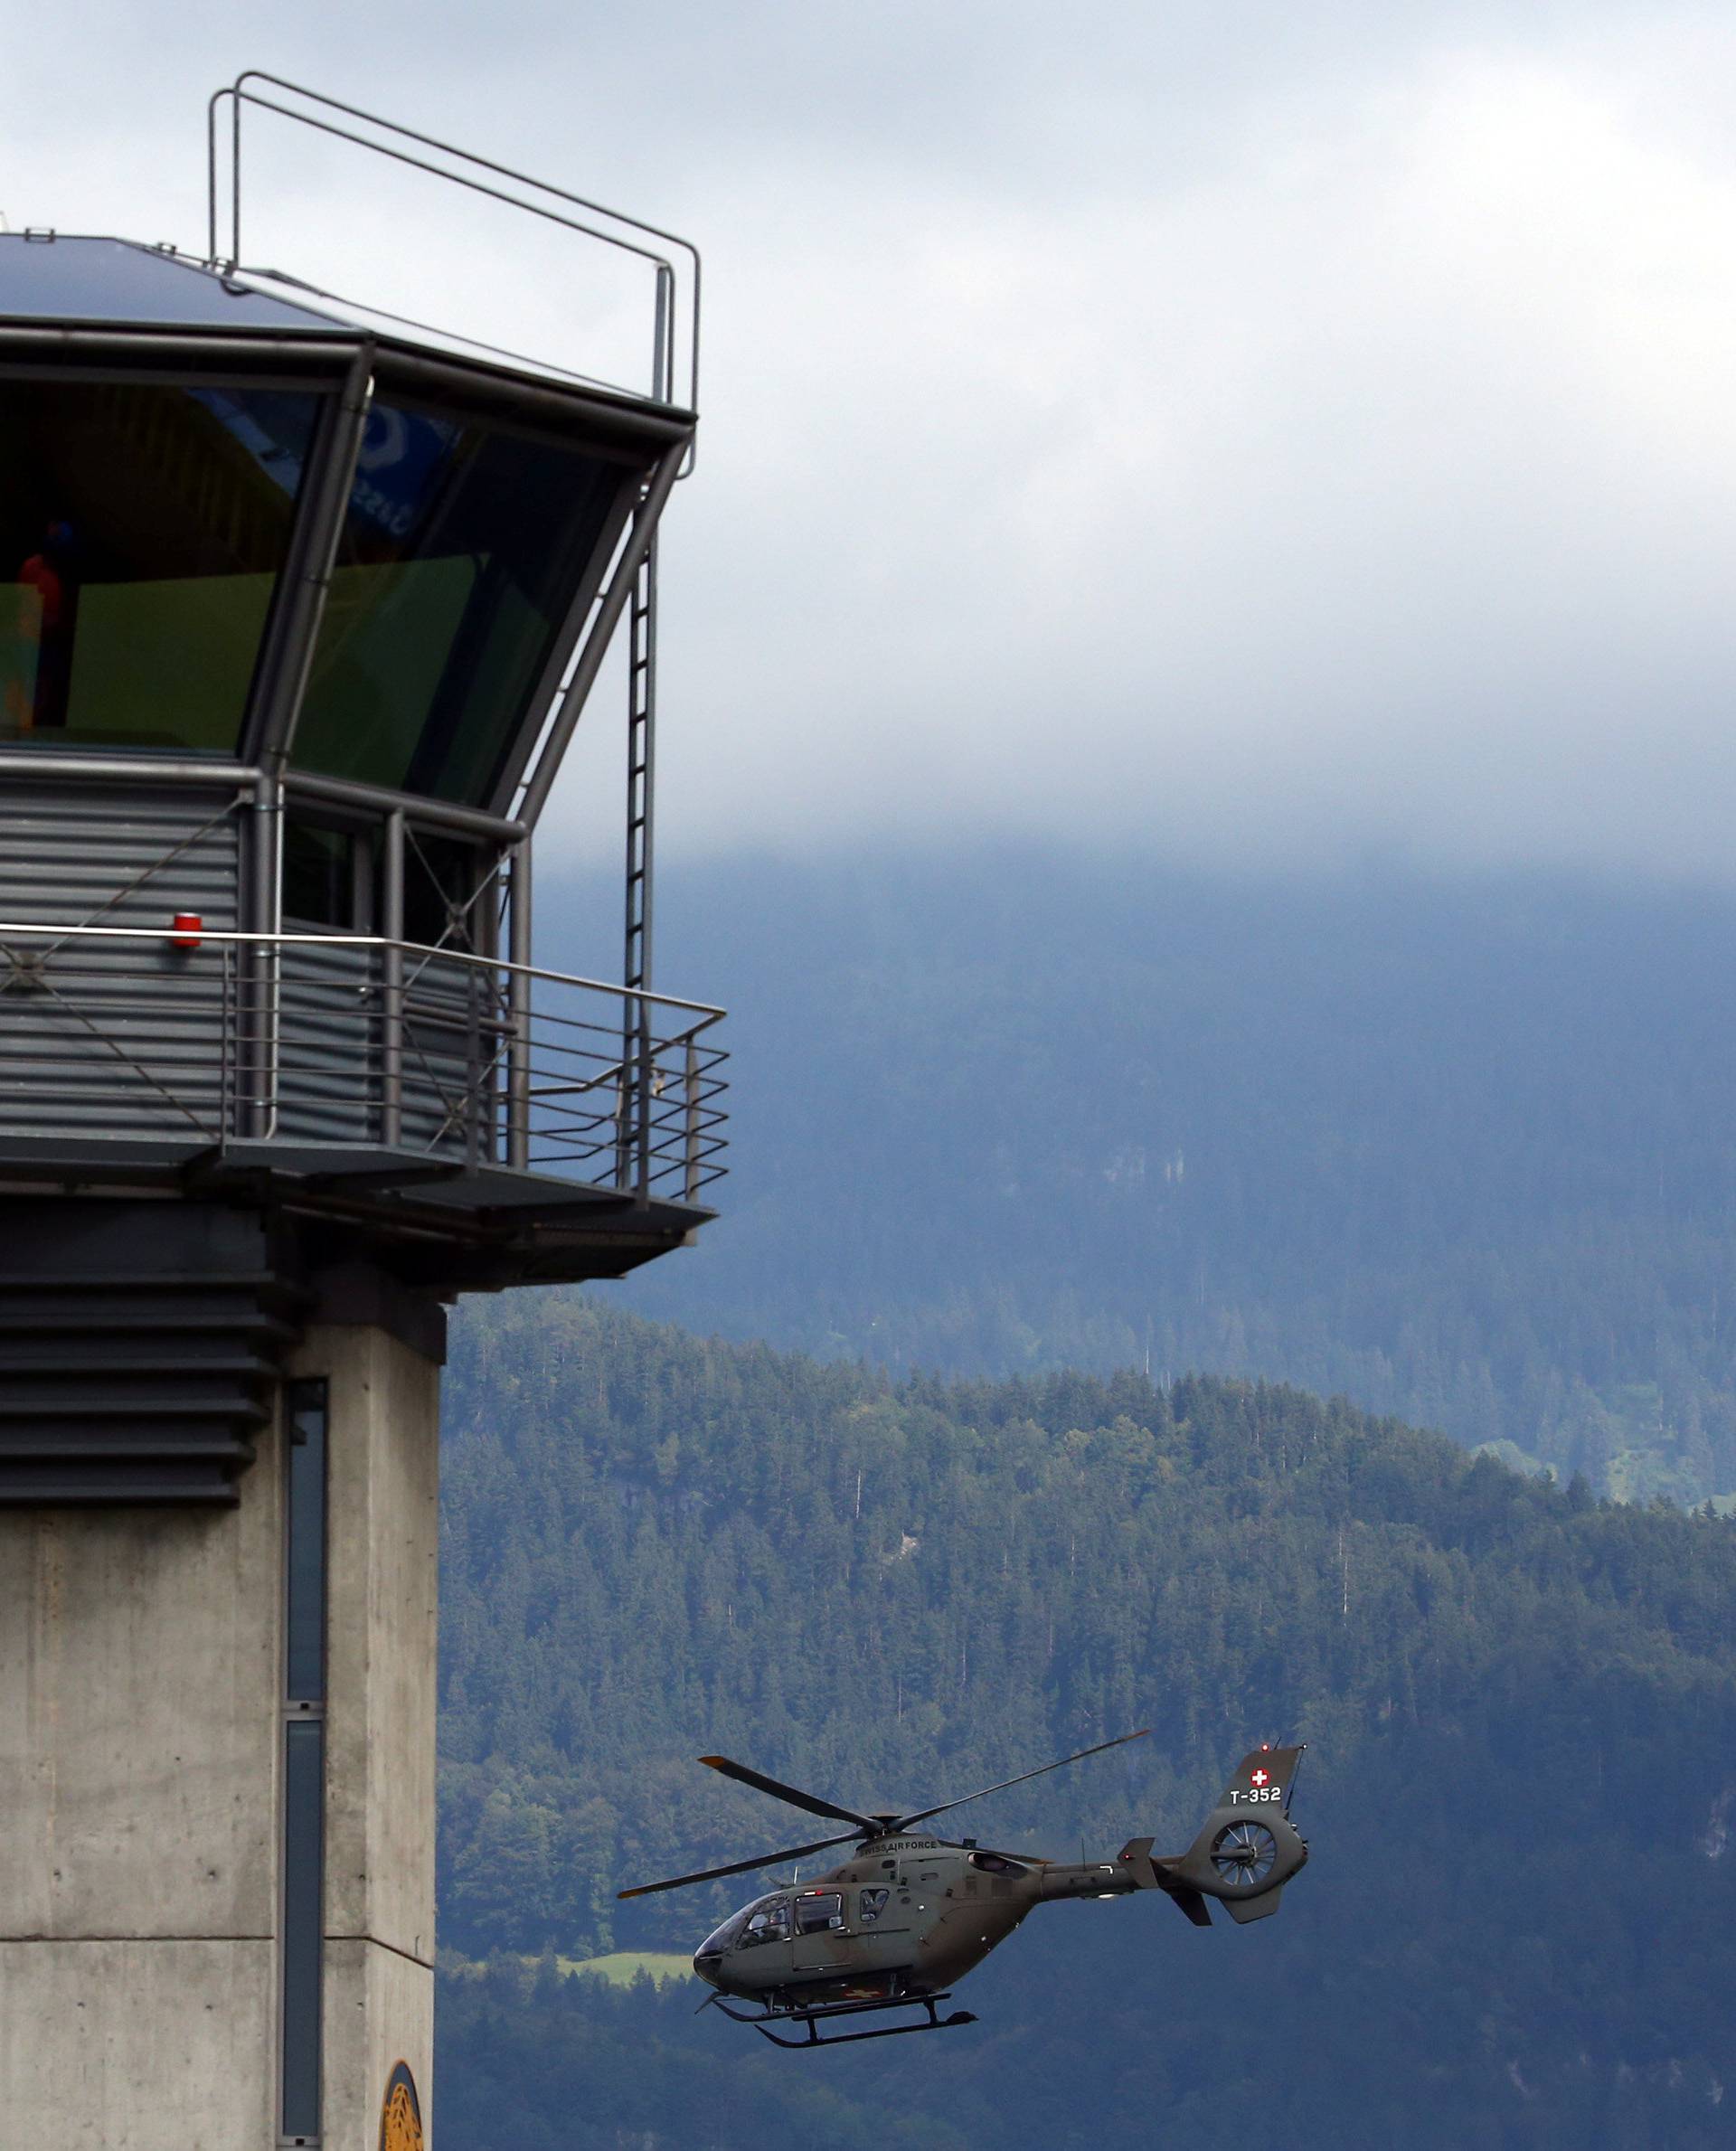 A Swiss Army Airforce helicopter take off next to the tower at the military airport in Meiringen